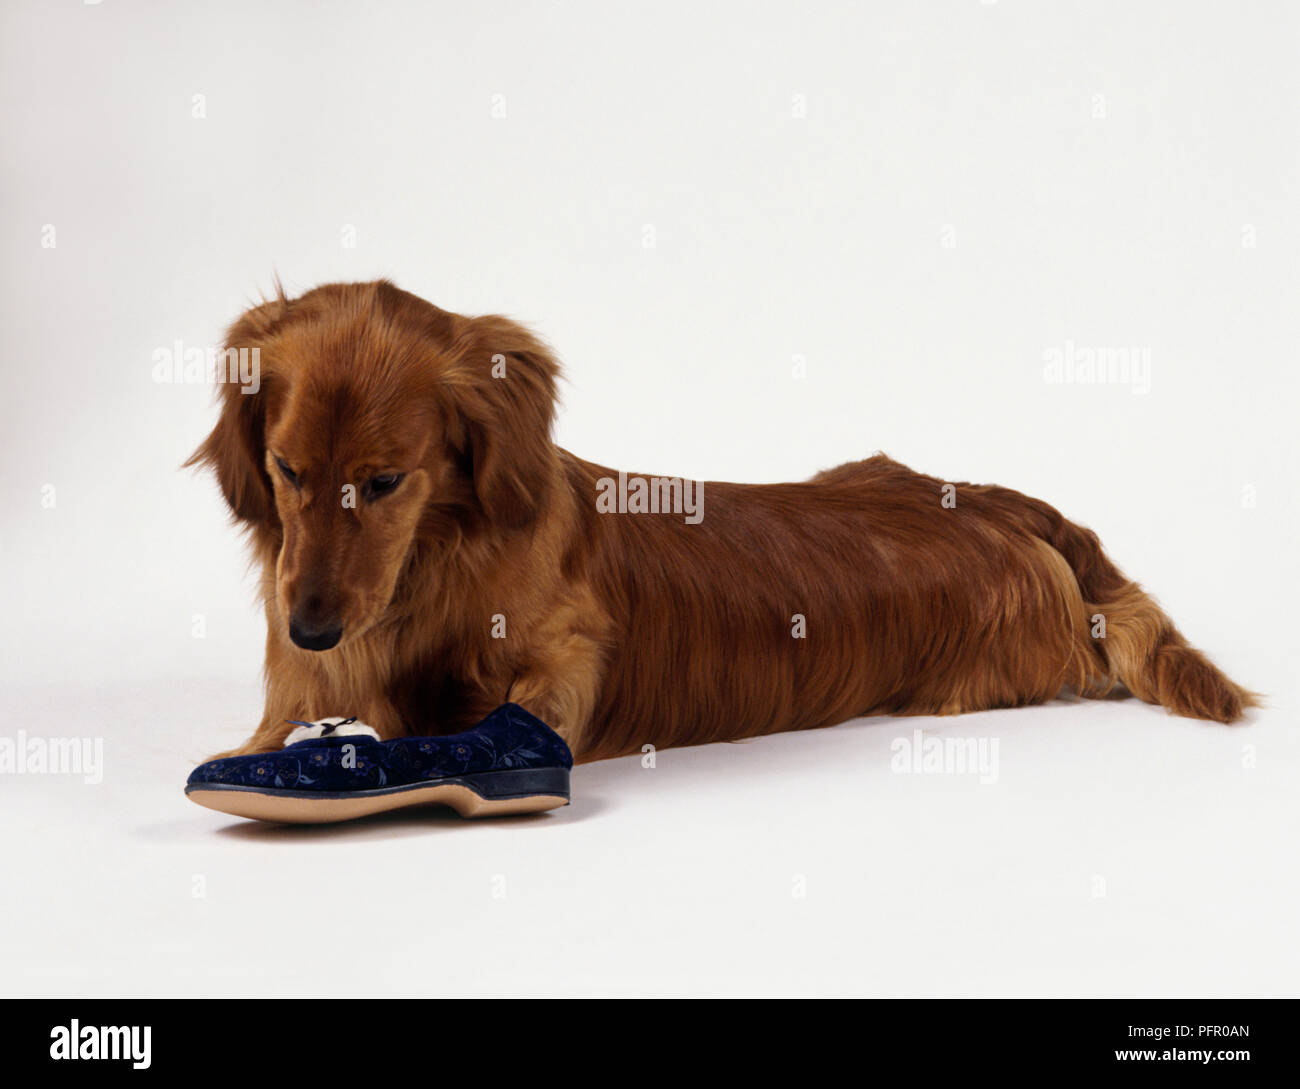 Red longhair Dachshund dog lying down looking at slipper Stock Photo